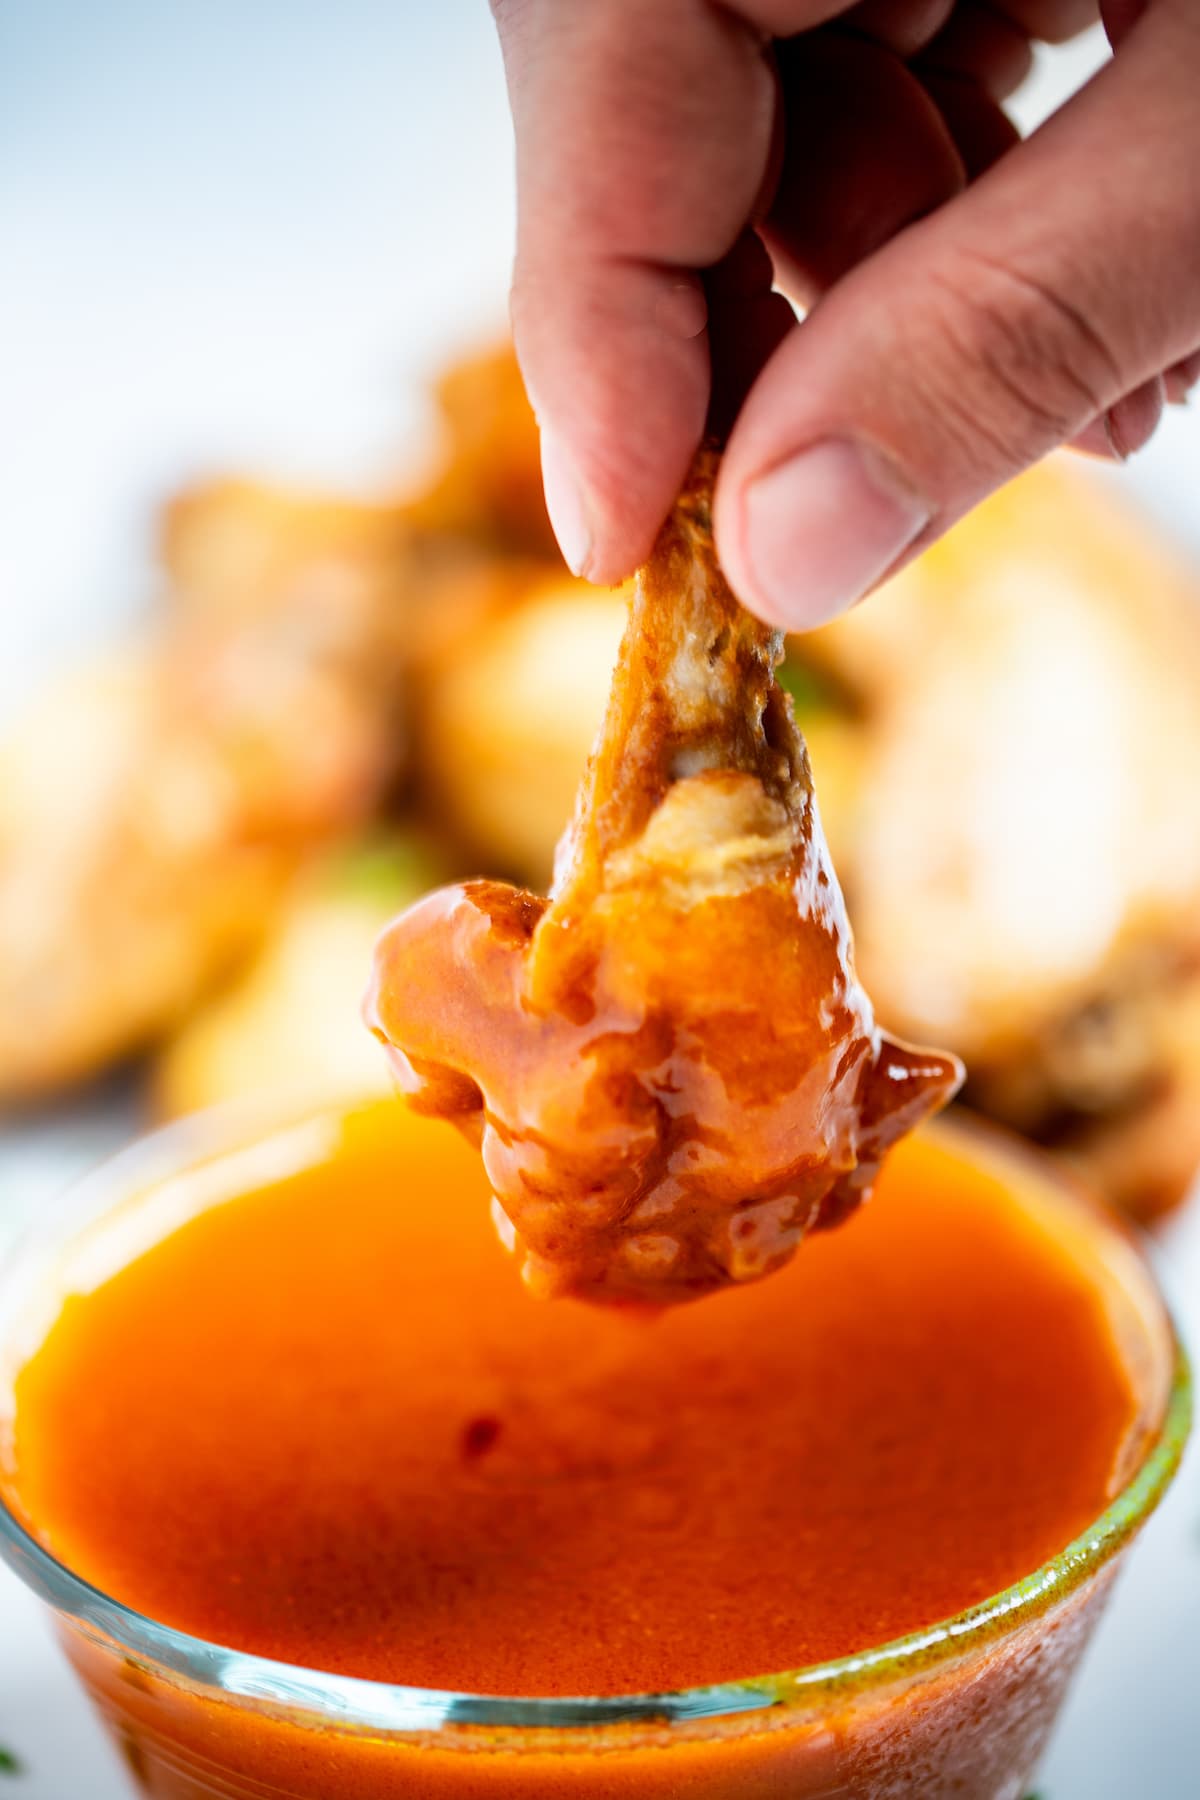 A hand holding a chicken wing after dipping it into a bowl of homemade buffalo wing sauce, with a plate of wings in the background.